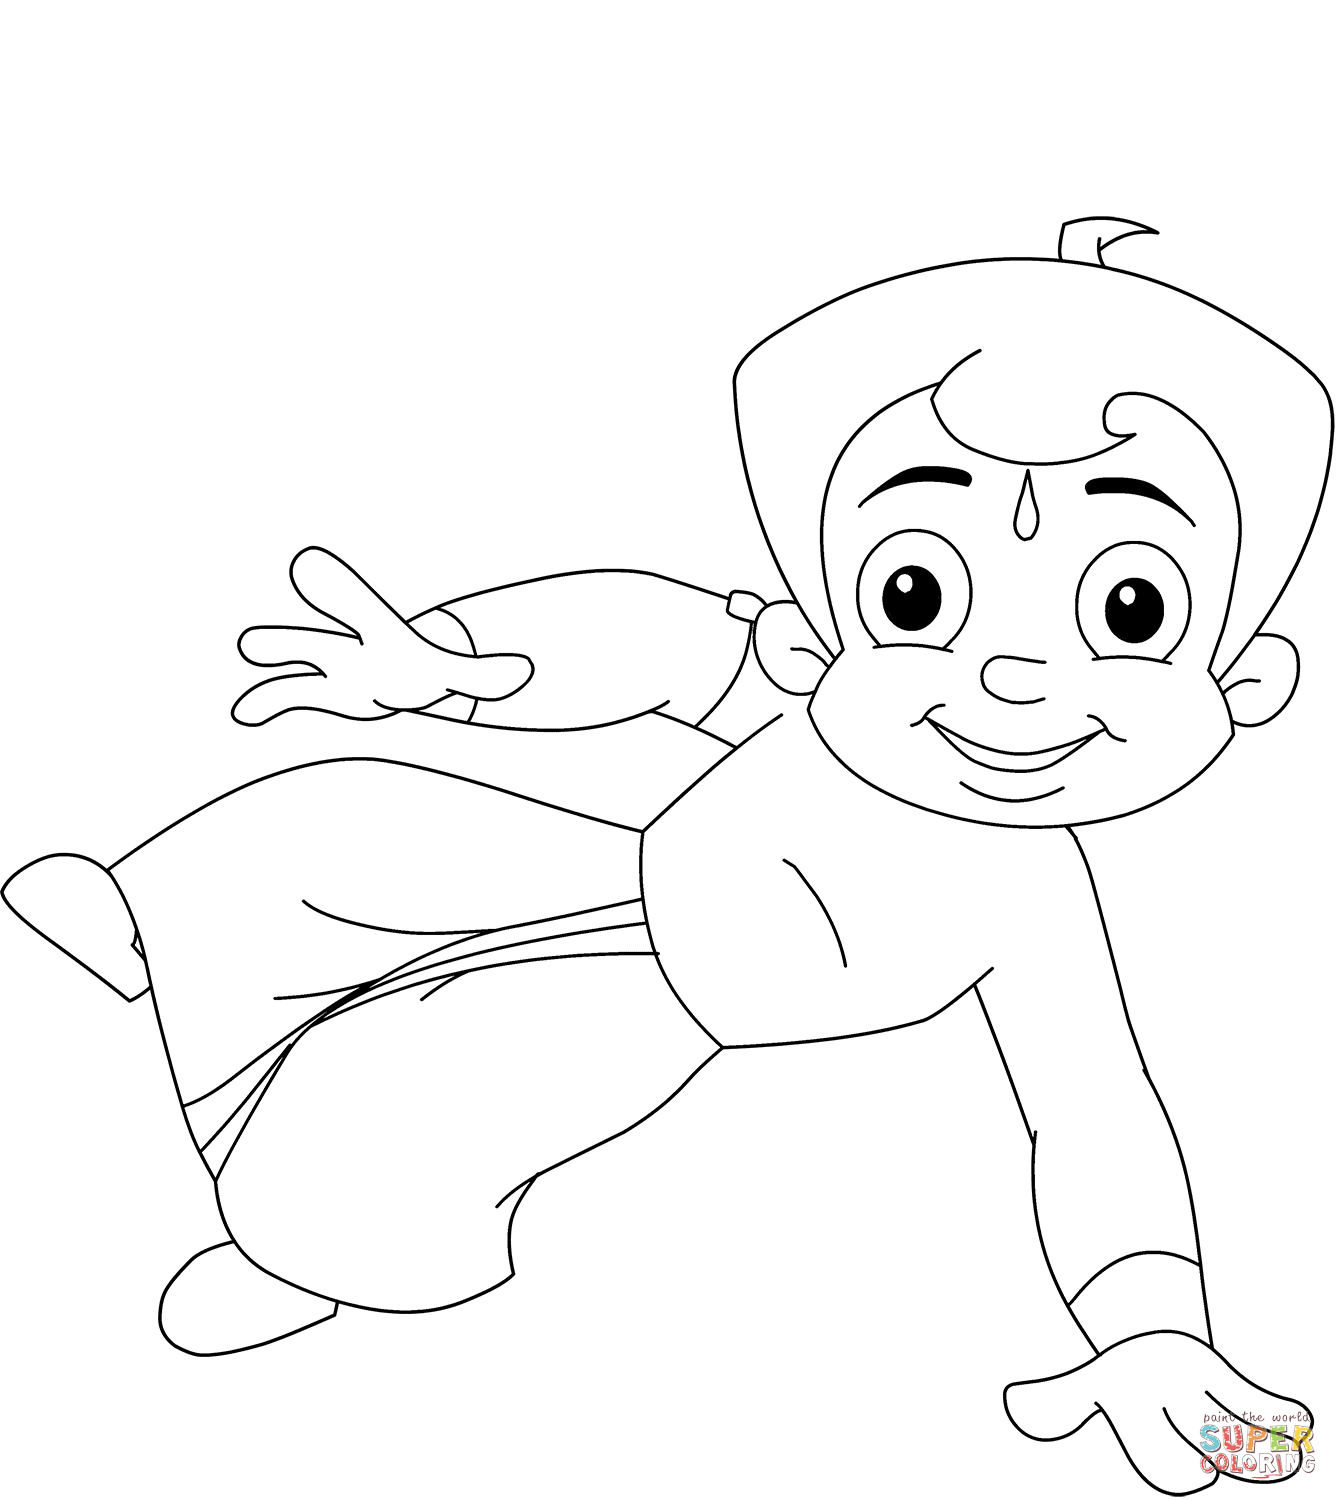 Chhota Bheem coloring page | Free Printable Coloring Pages